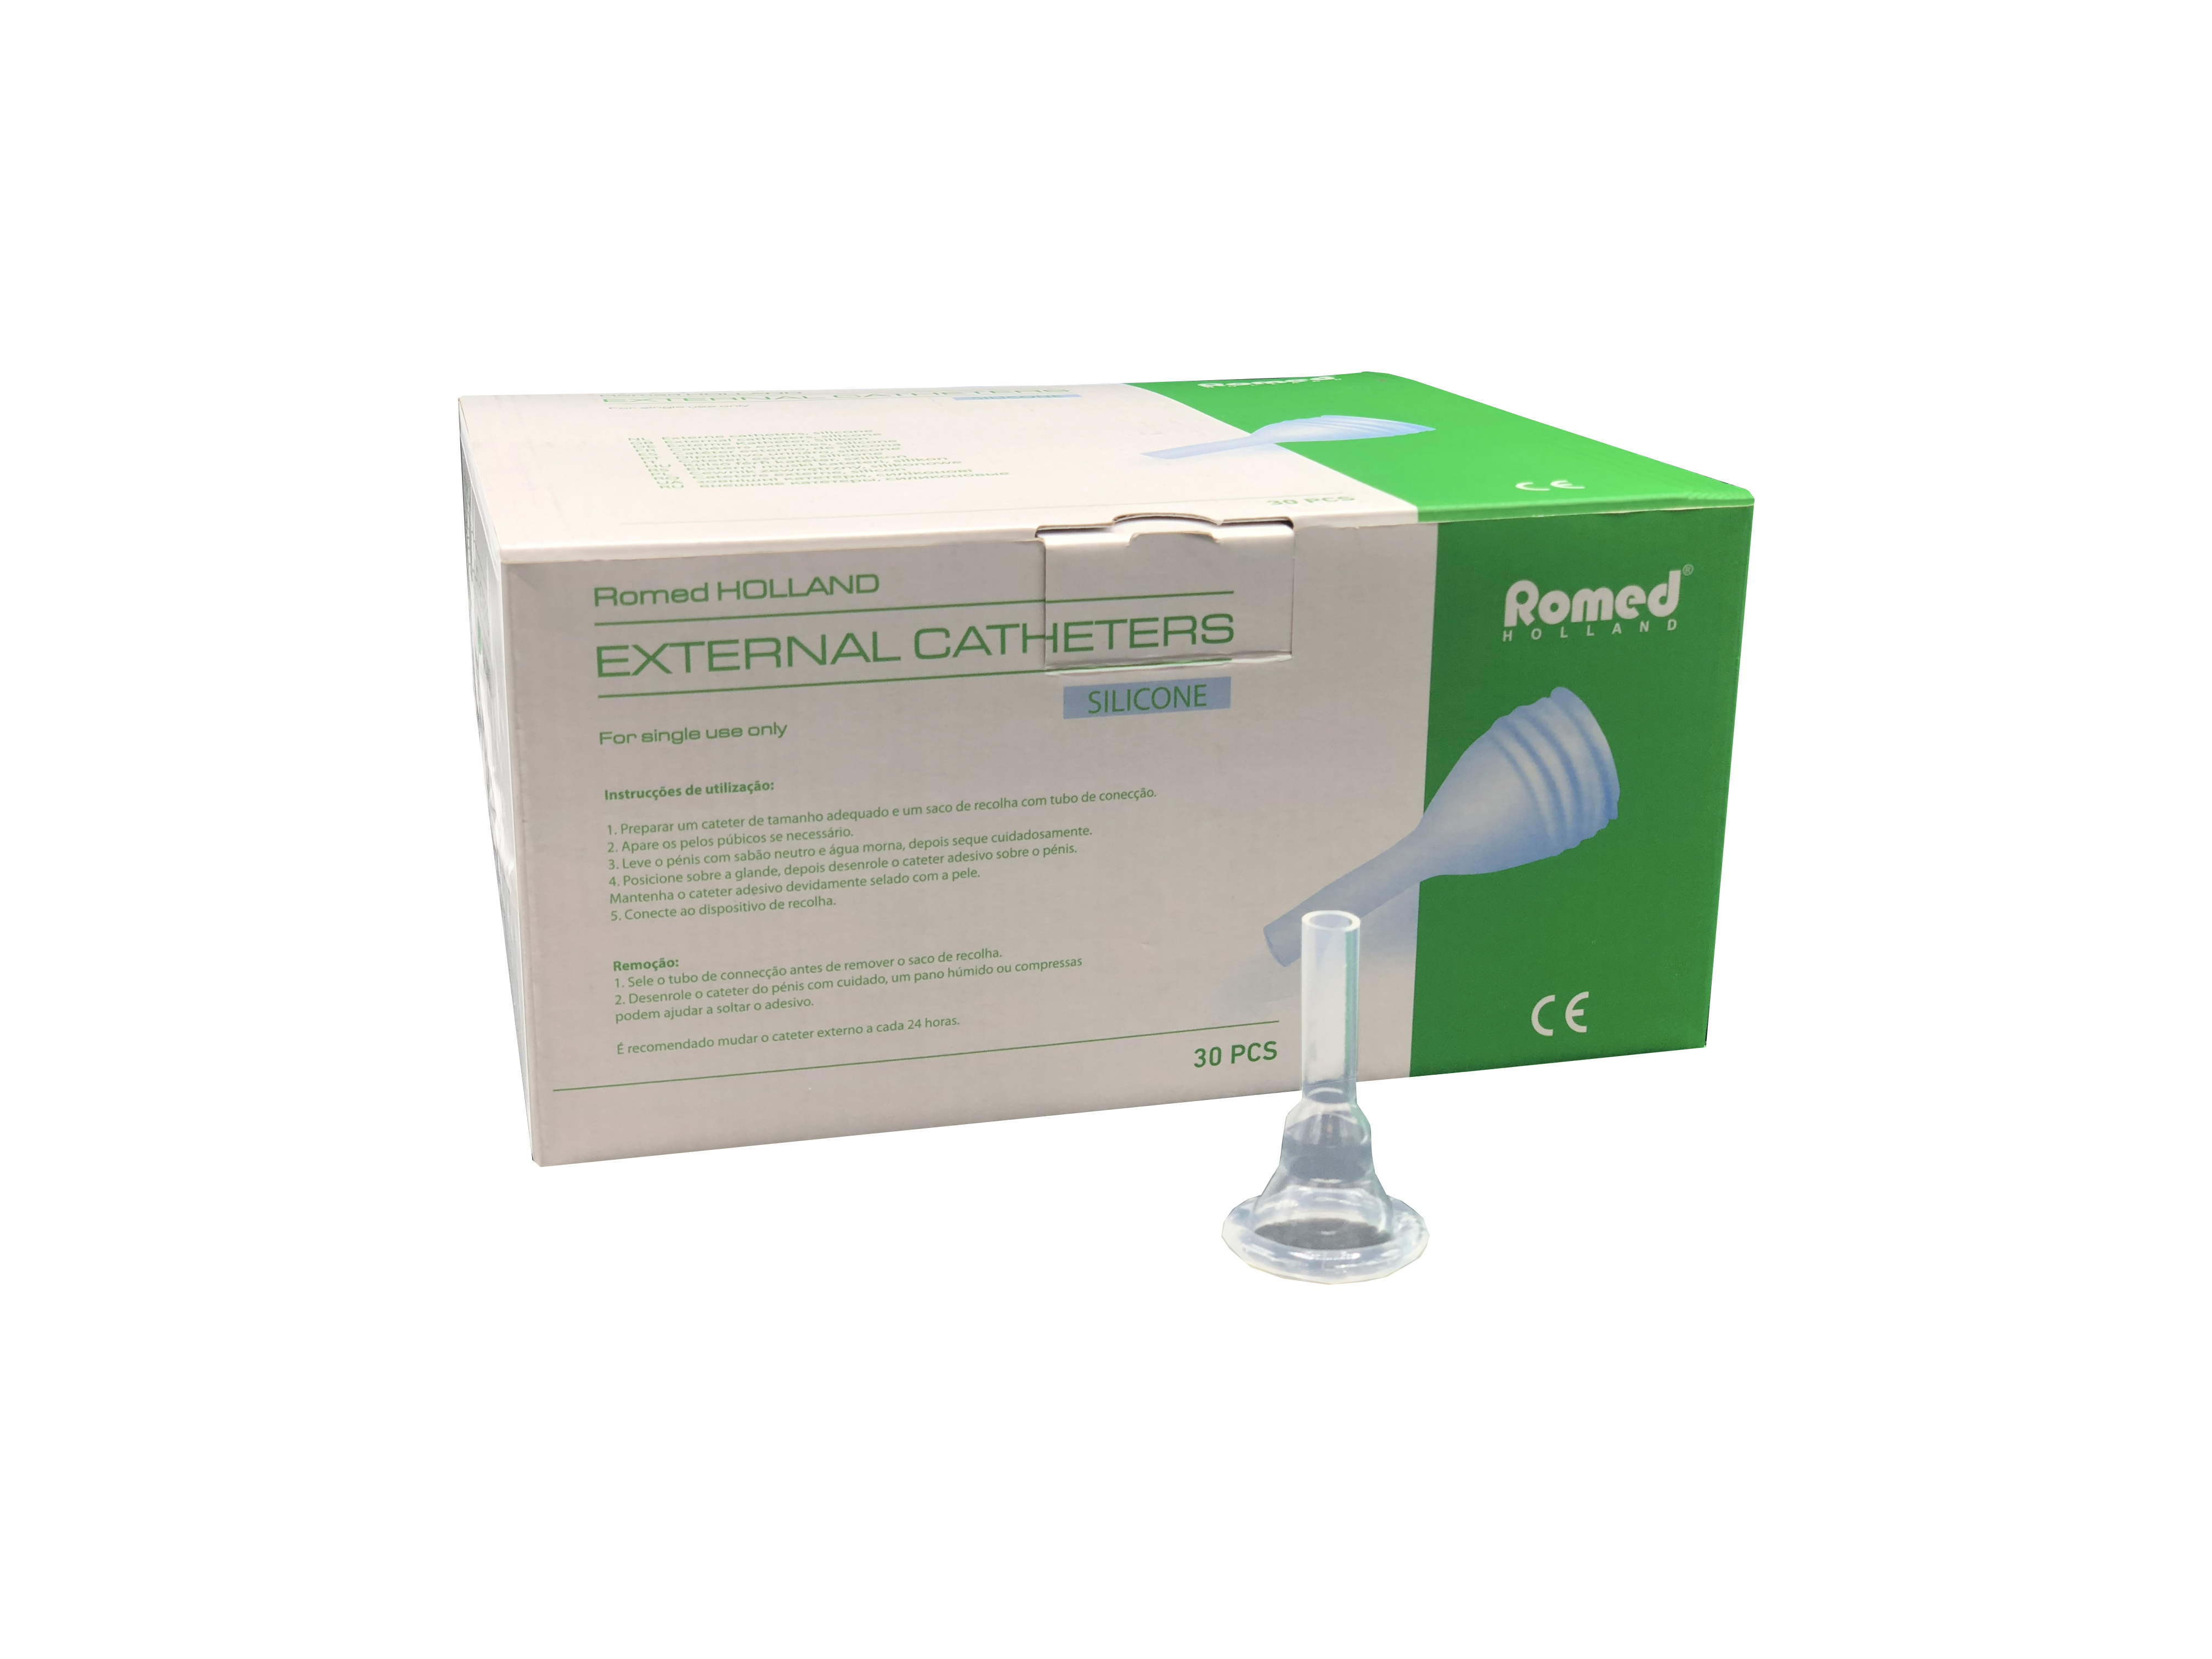 ECSIL-M Romed external catheters, silicone, self-adhesive, per piece in a peel pouch, 30 pcs in an inner box, 12 x 30 pcs = 360 pcs in a carton.